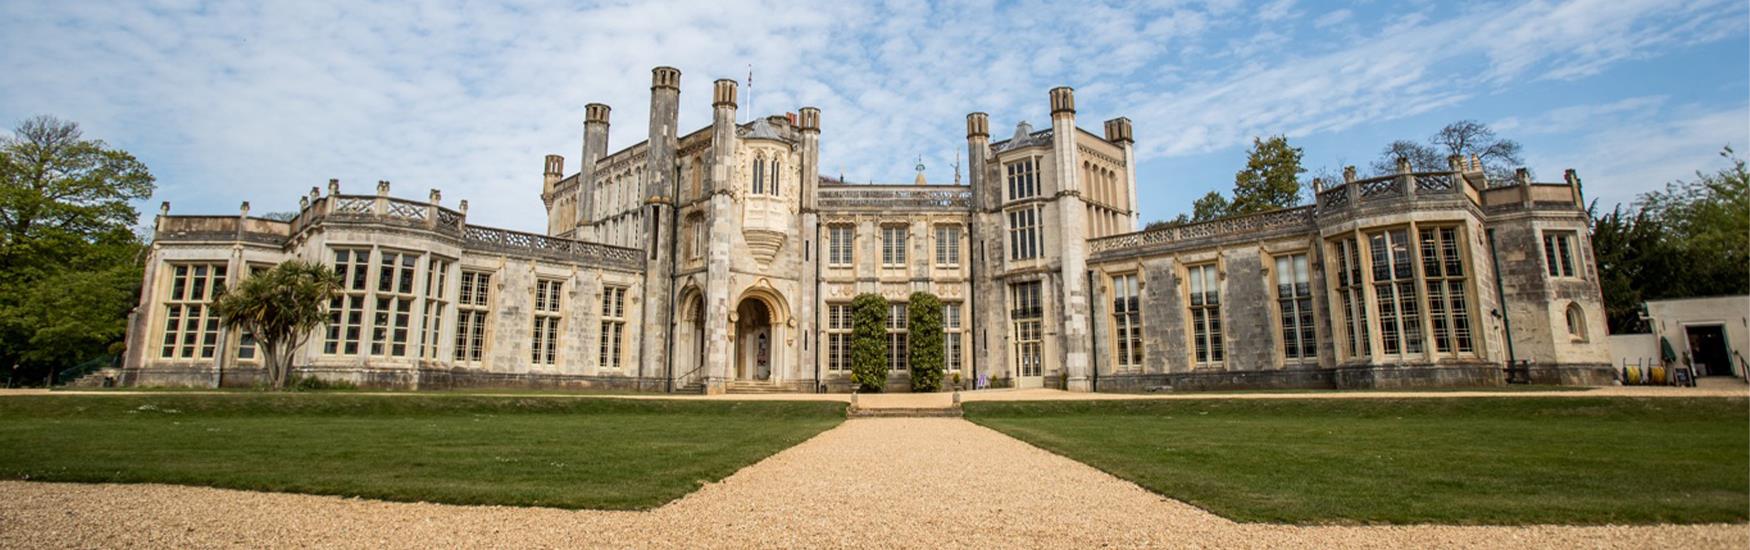 Stunning low angle shot of Highcliffe castle on a warm summers day